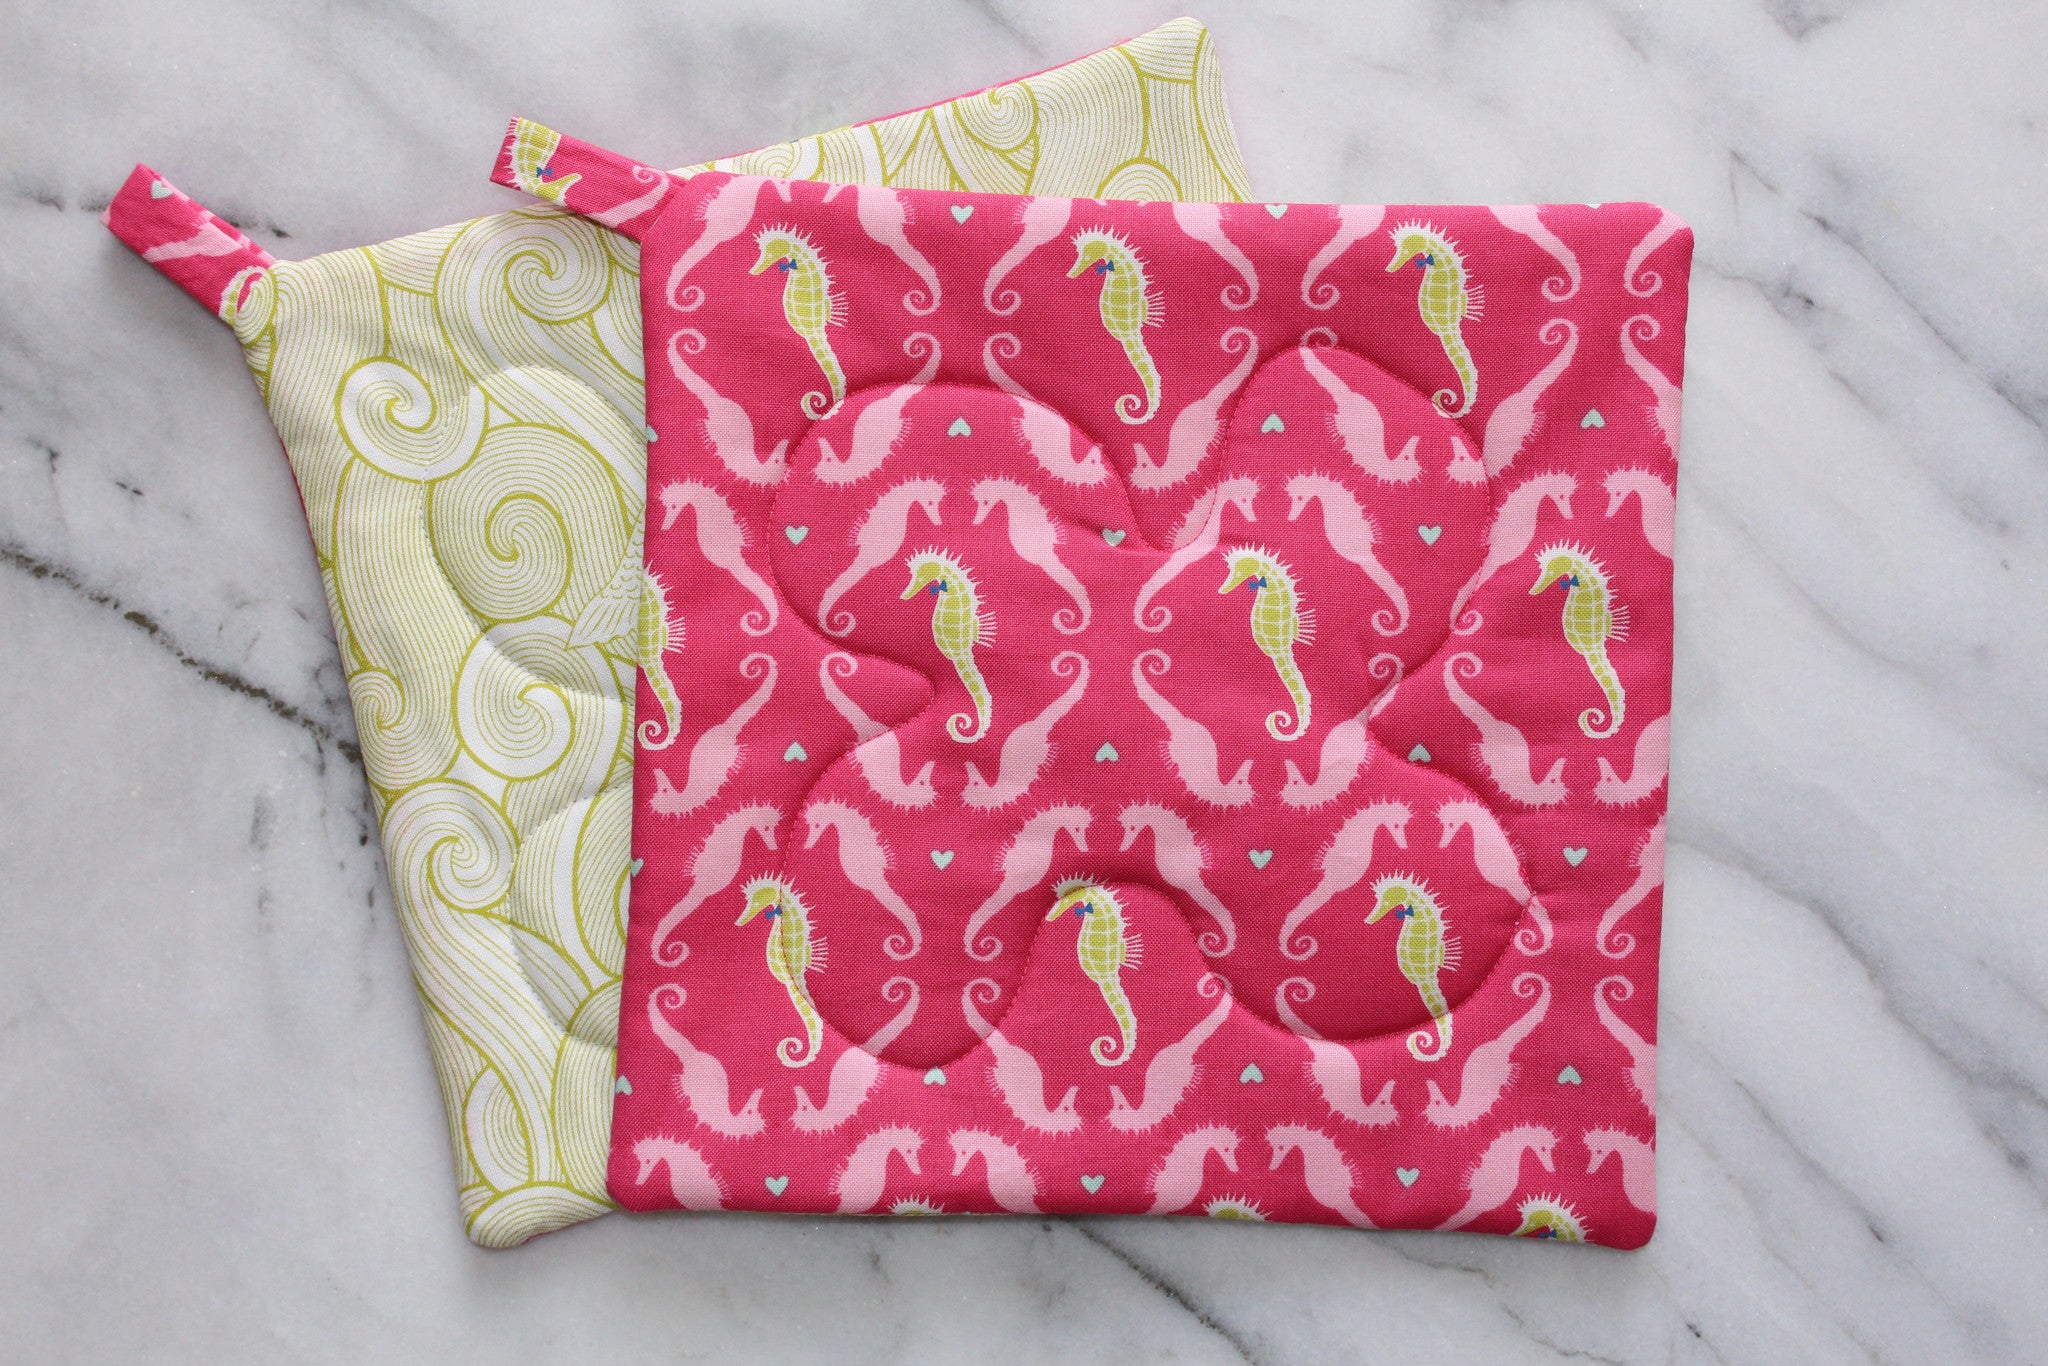 Dapper Seahorses Potholder-The Blue Peony-Animal_Seahorse,Category_Pot Holder,Color_Lime Green,Color_Pink,Department_Kitchen,Size_Traditional (Square),Theme_Animal,Theme_Water Life